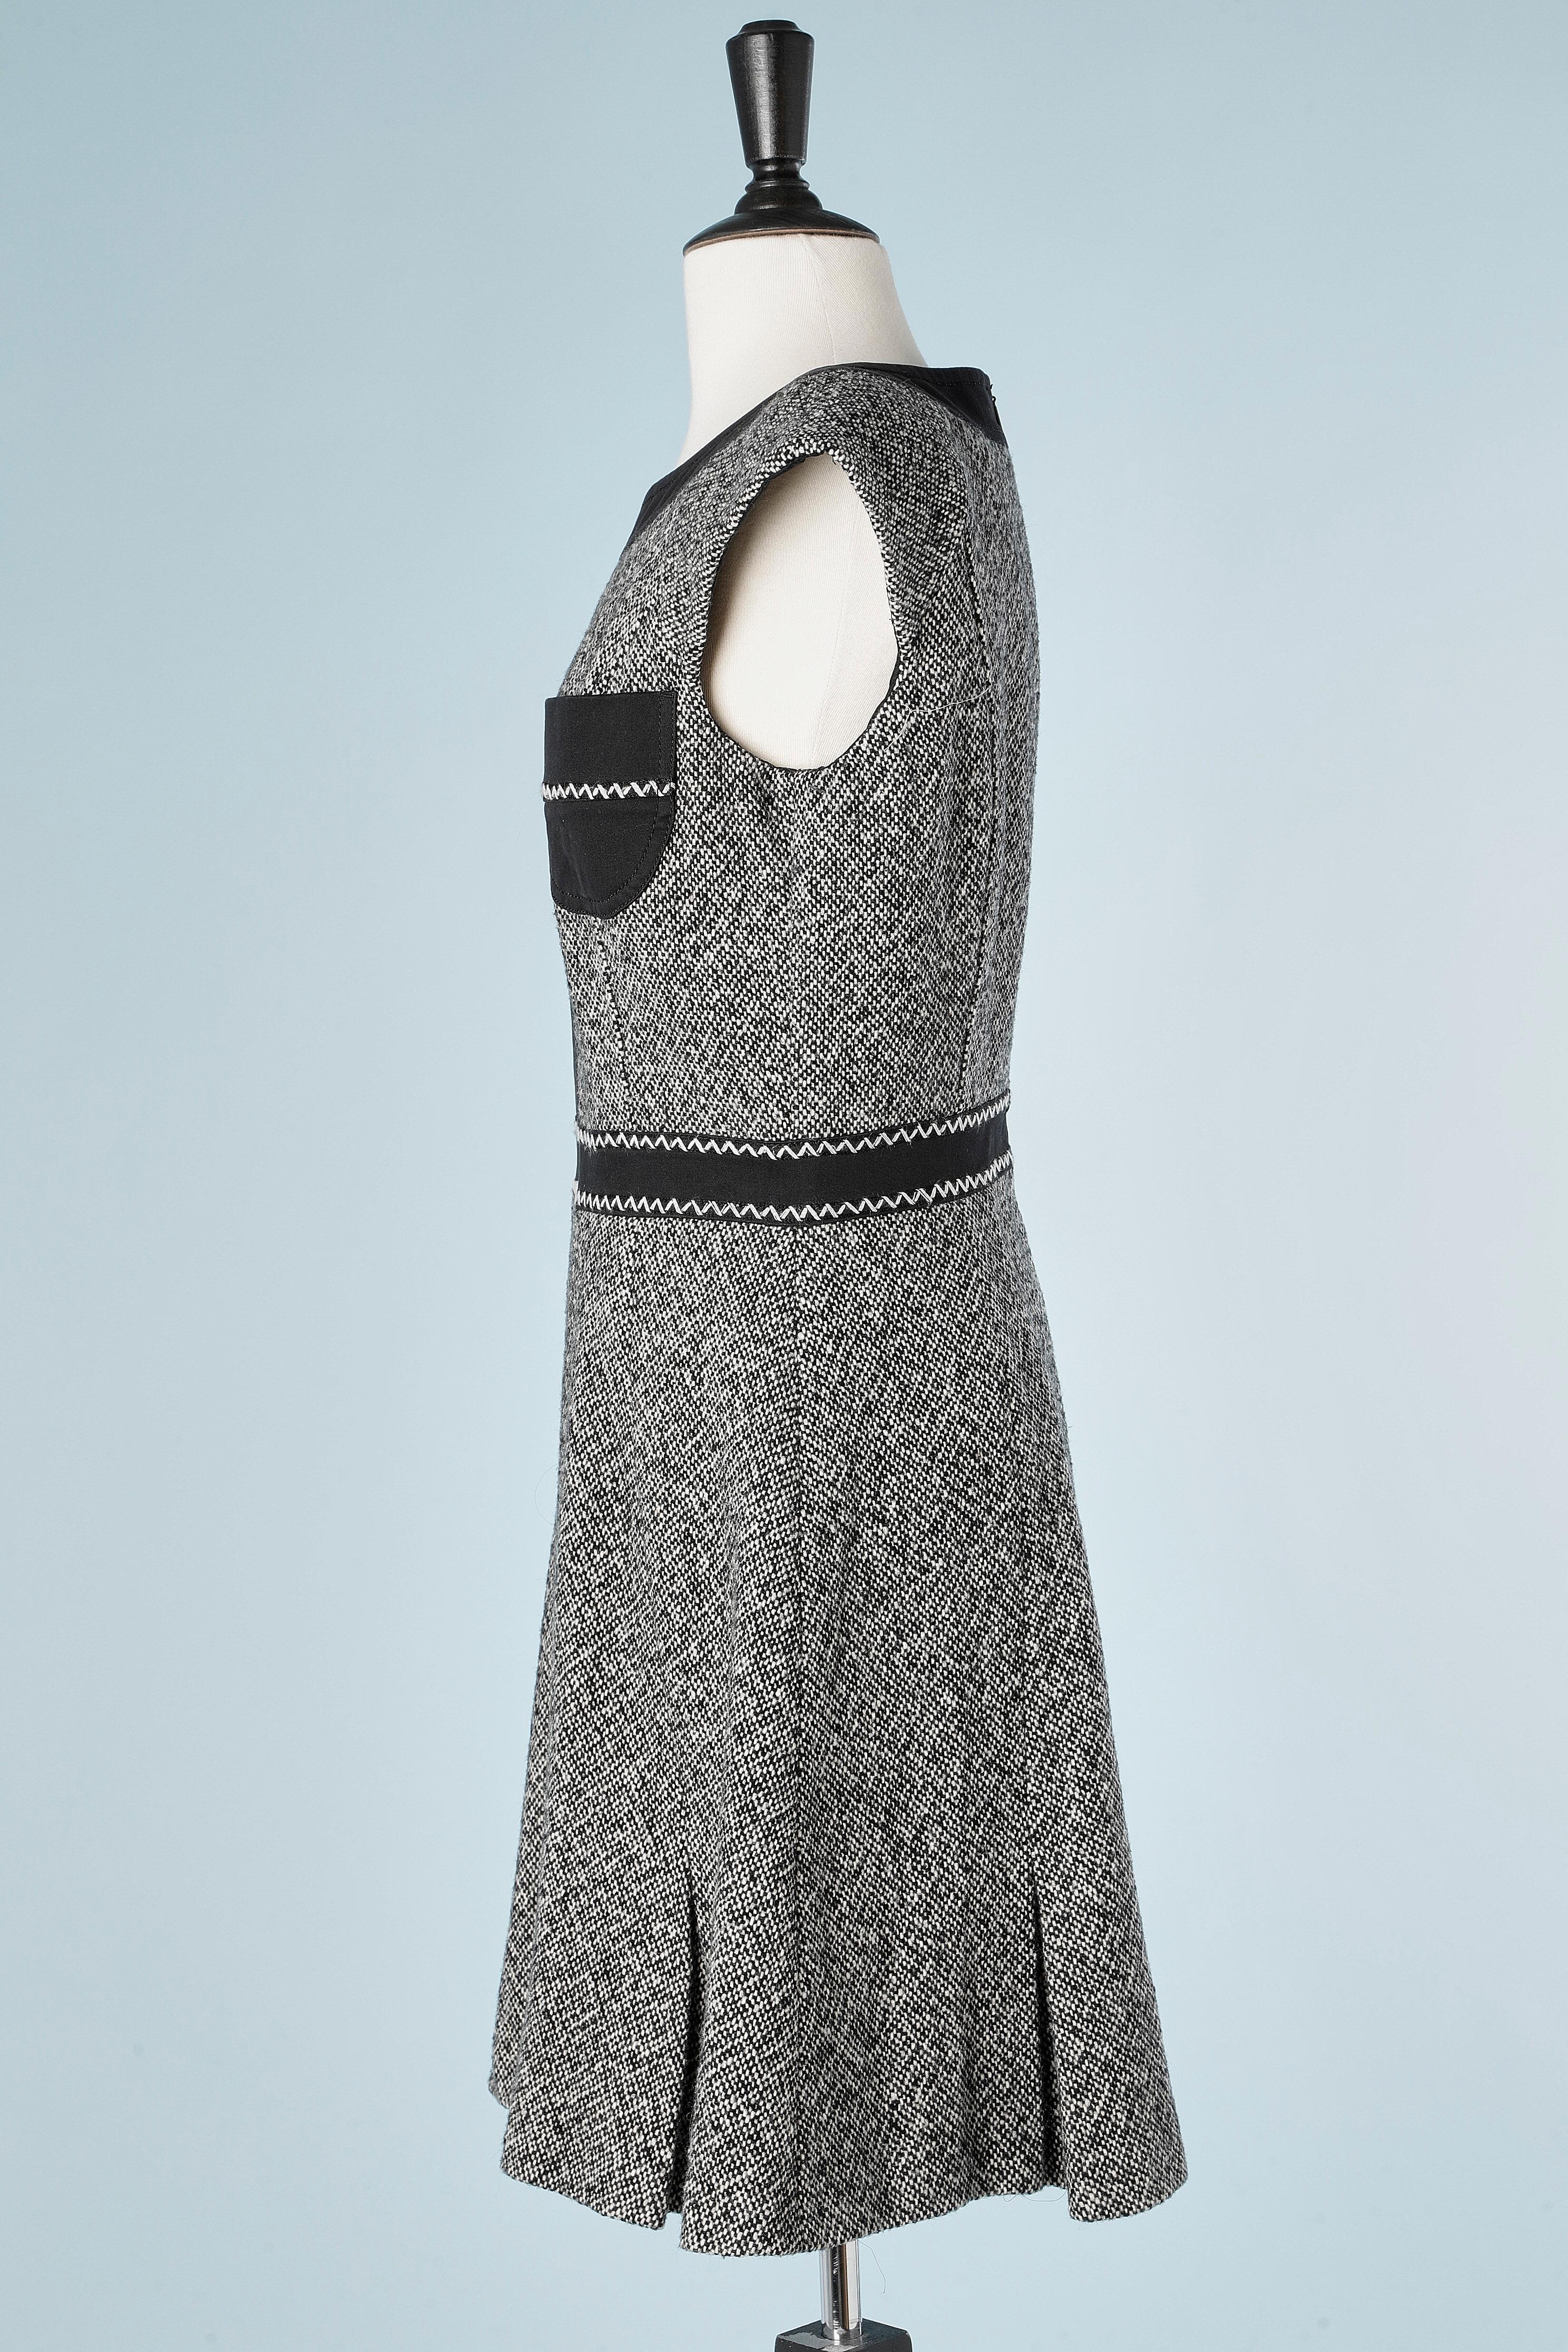 Gray Sleeveless black and white tweed dress with black cotton pockets Versace Jeans  For Sale